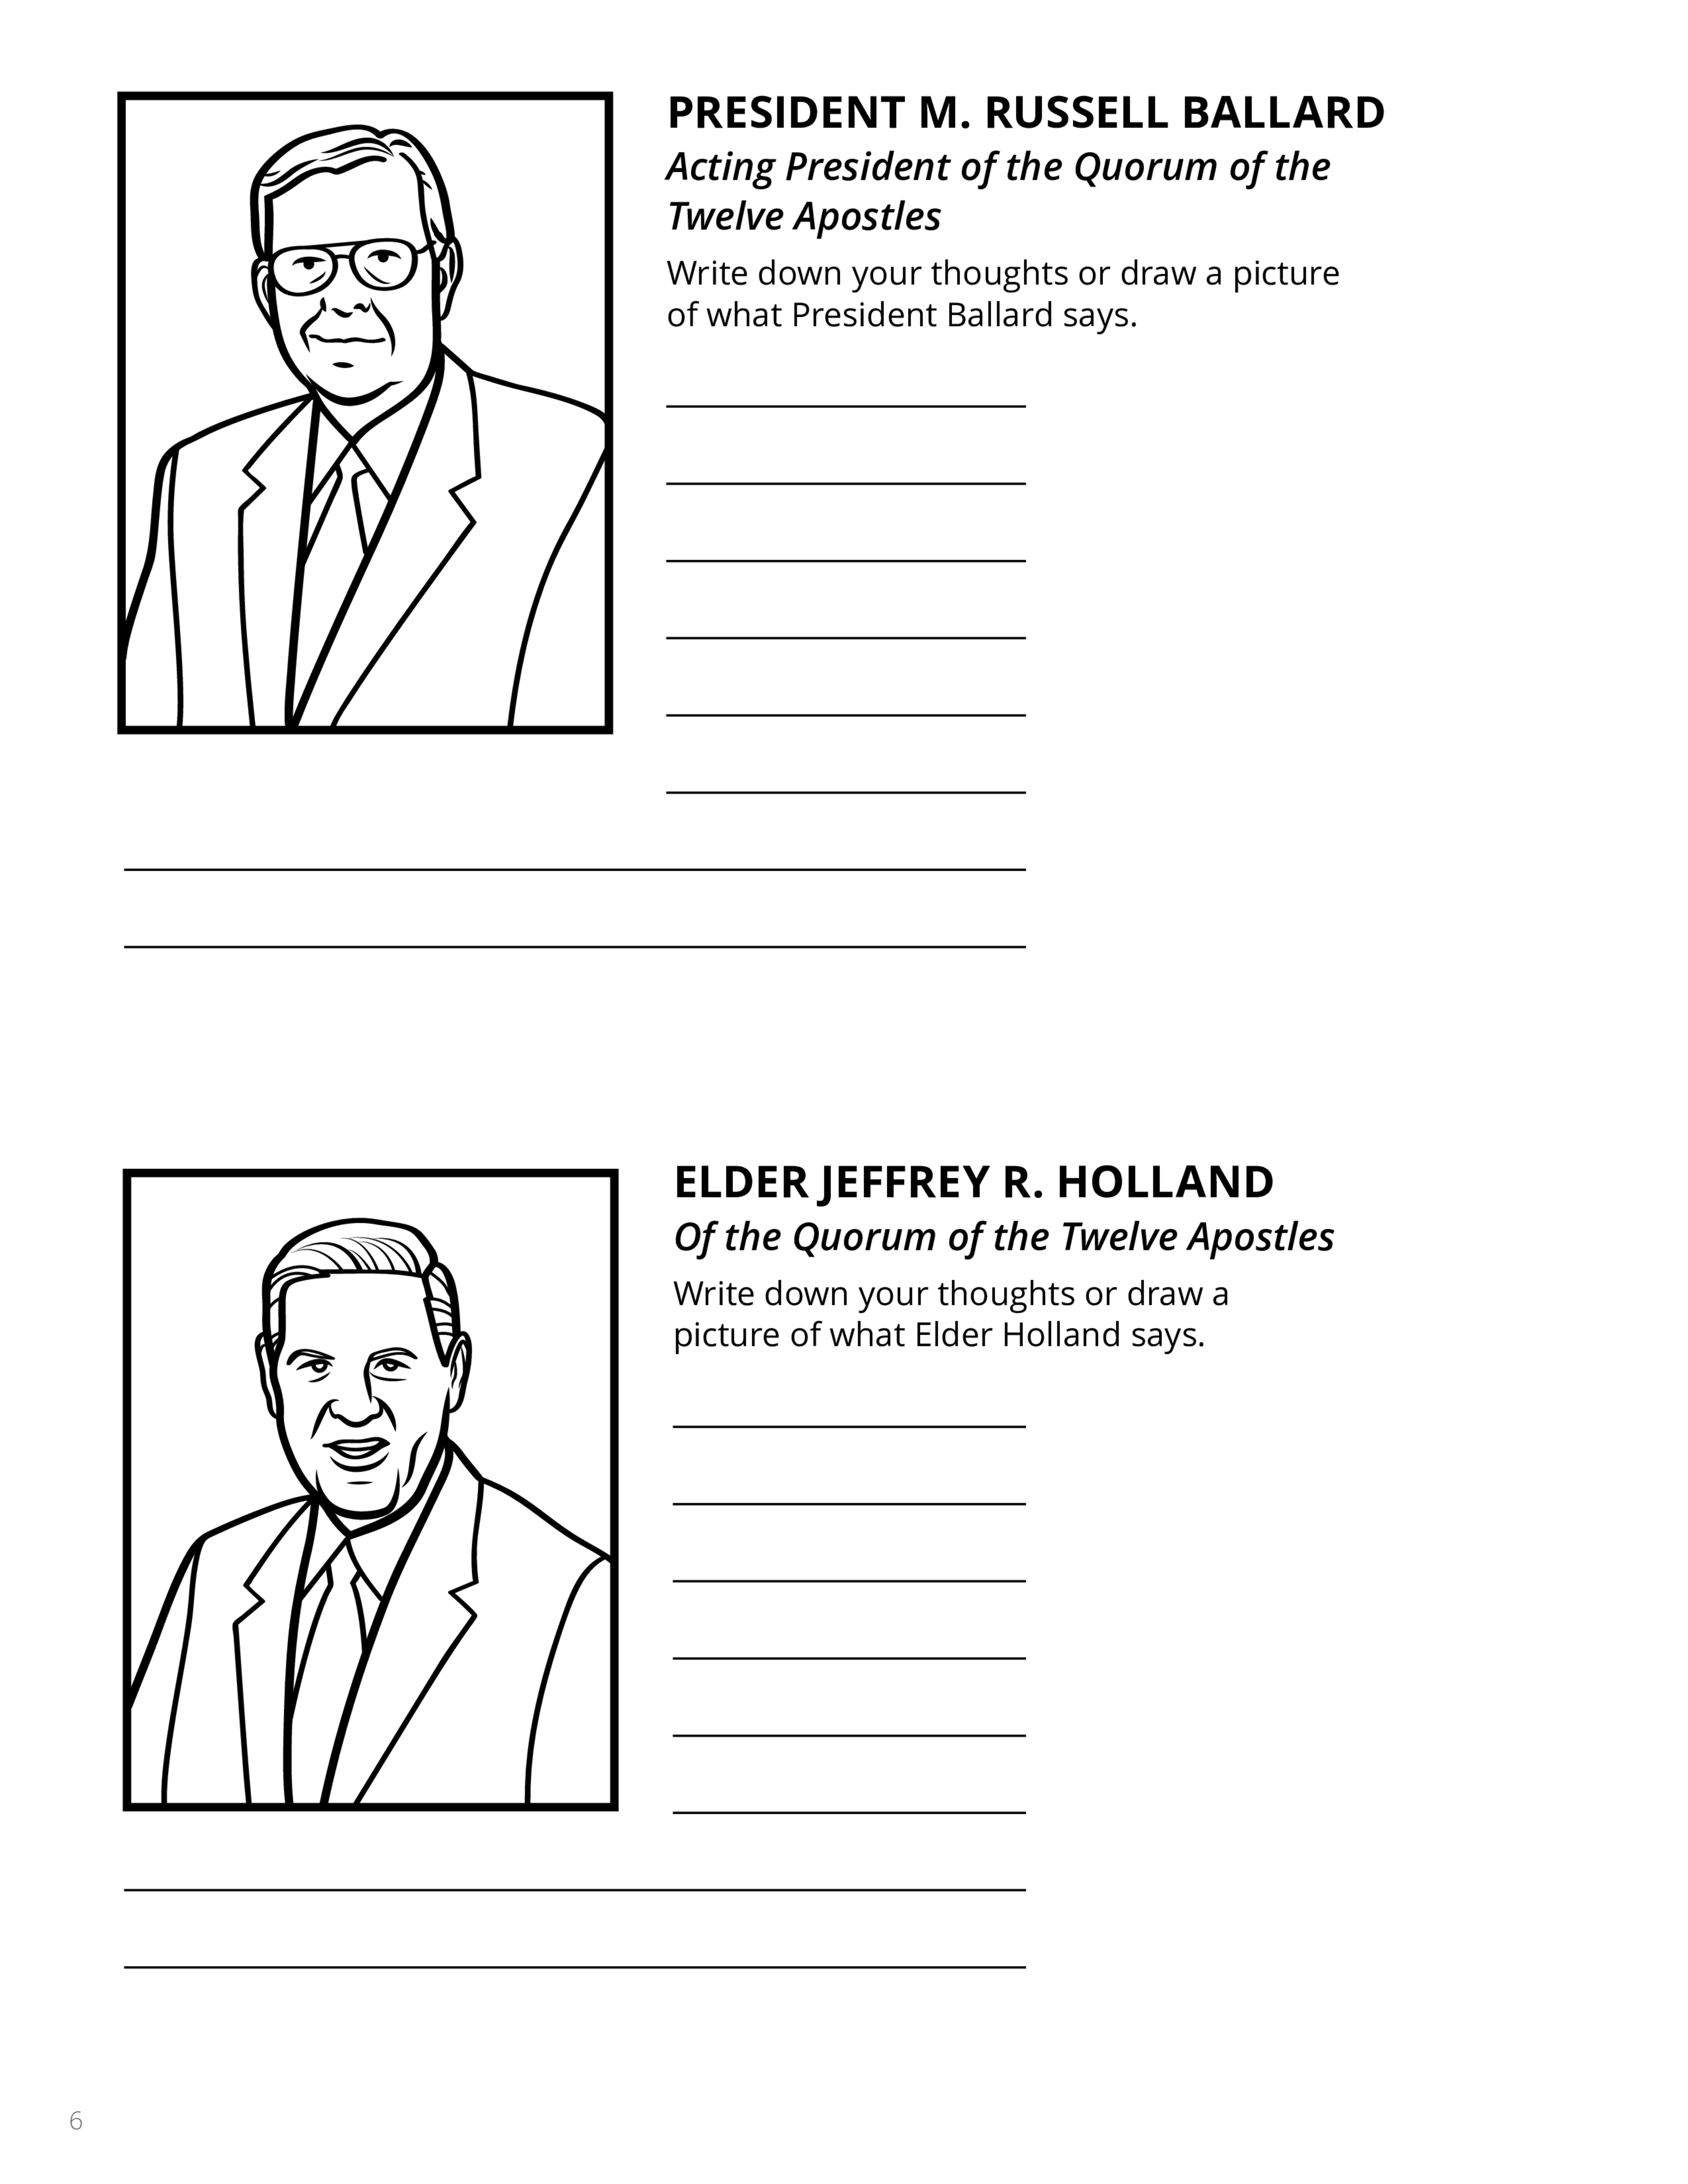 An activity page to encourage children to listen and write down thoughts or draw a picture of what M. Russell Ballard and Jeffrey R. Holland say.